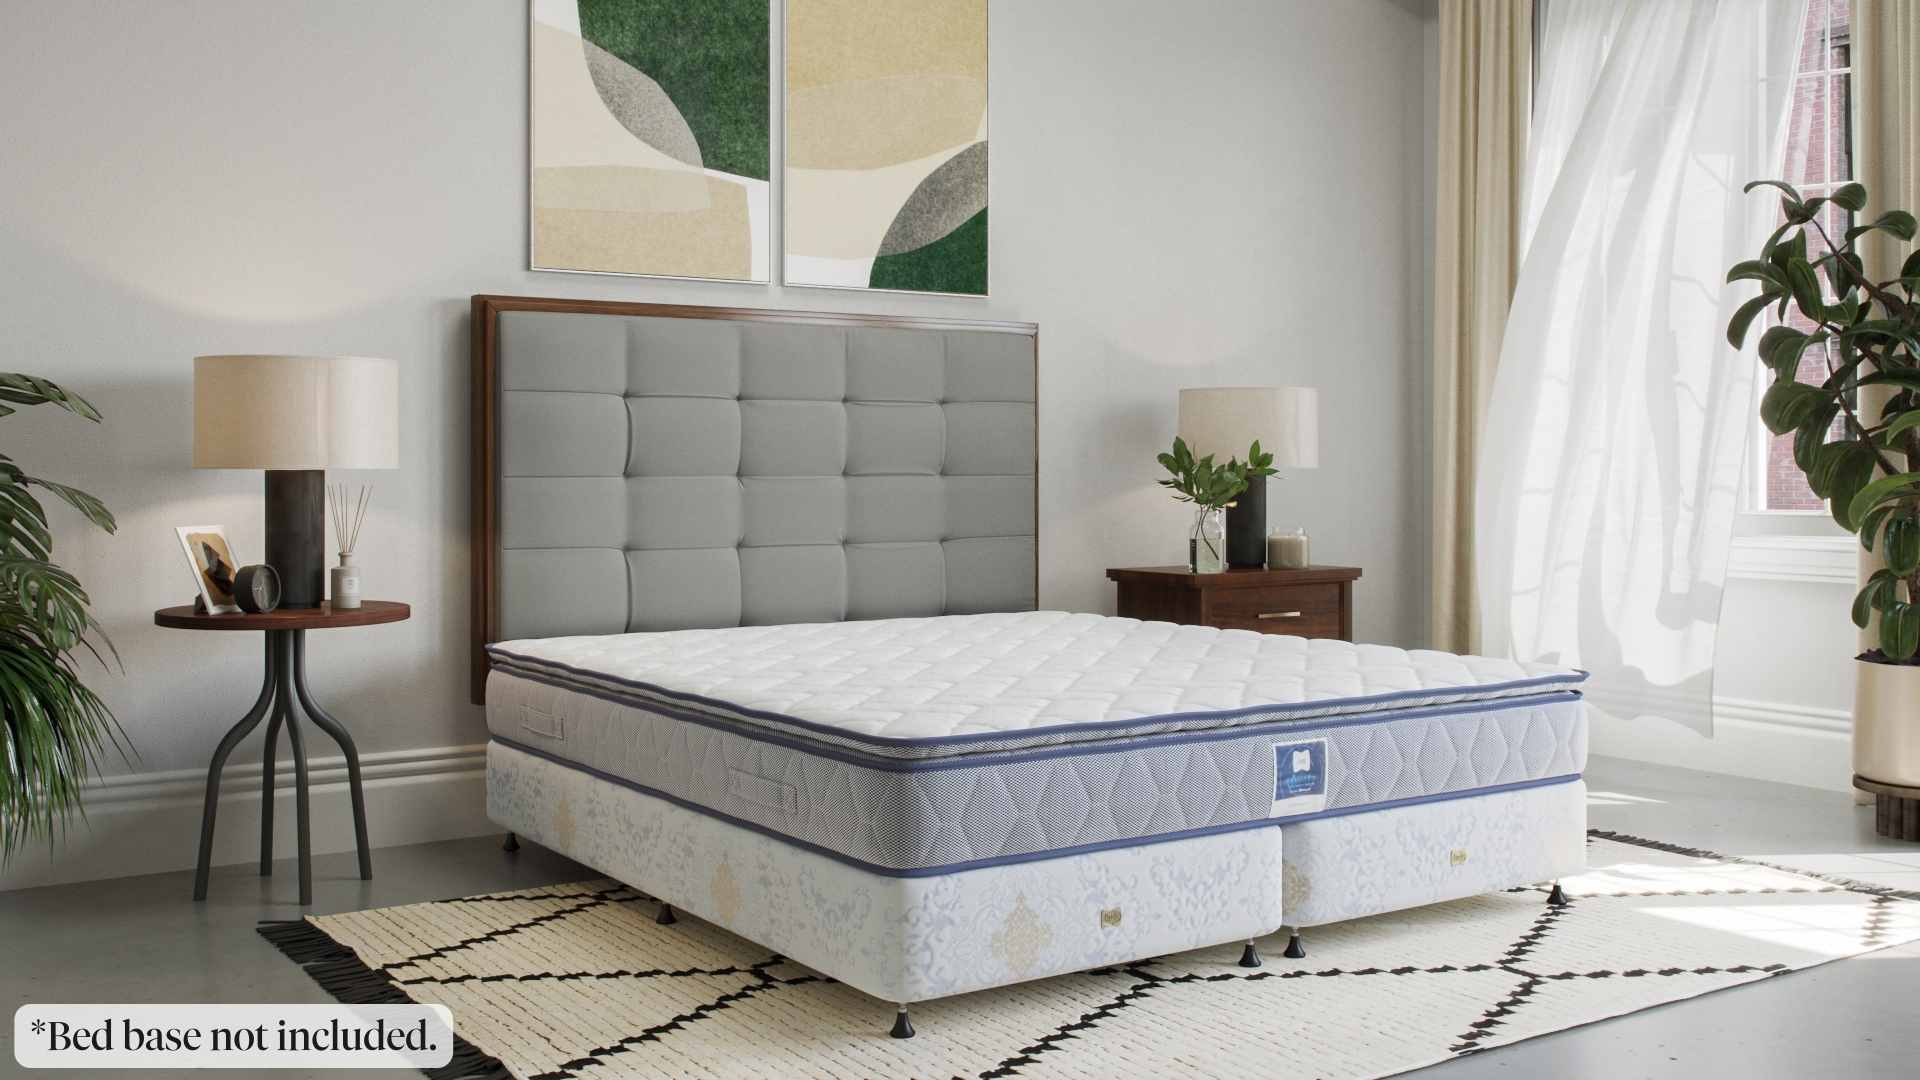 Sealy Active Support Mattress